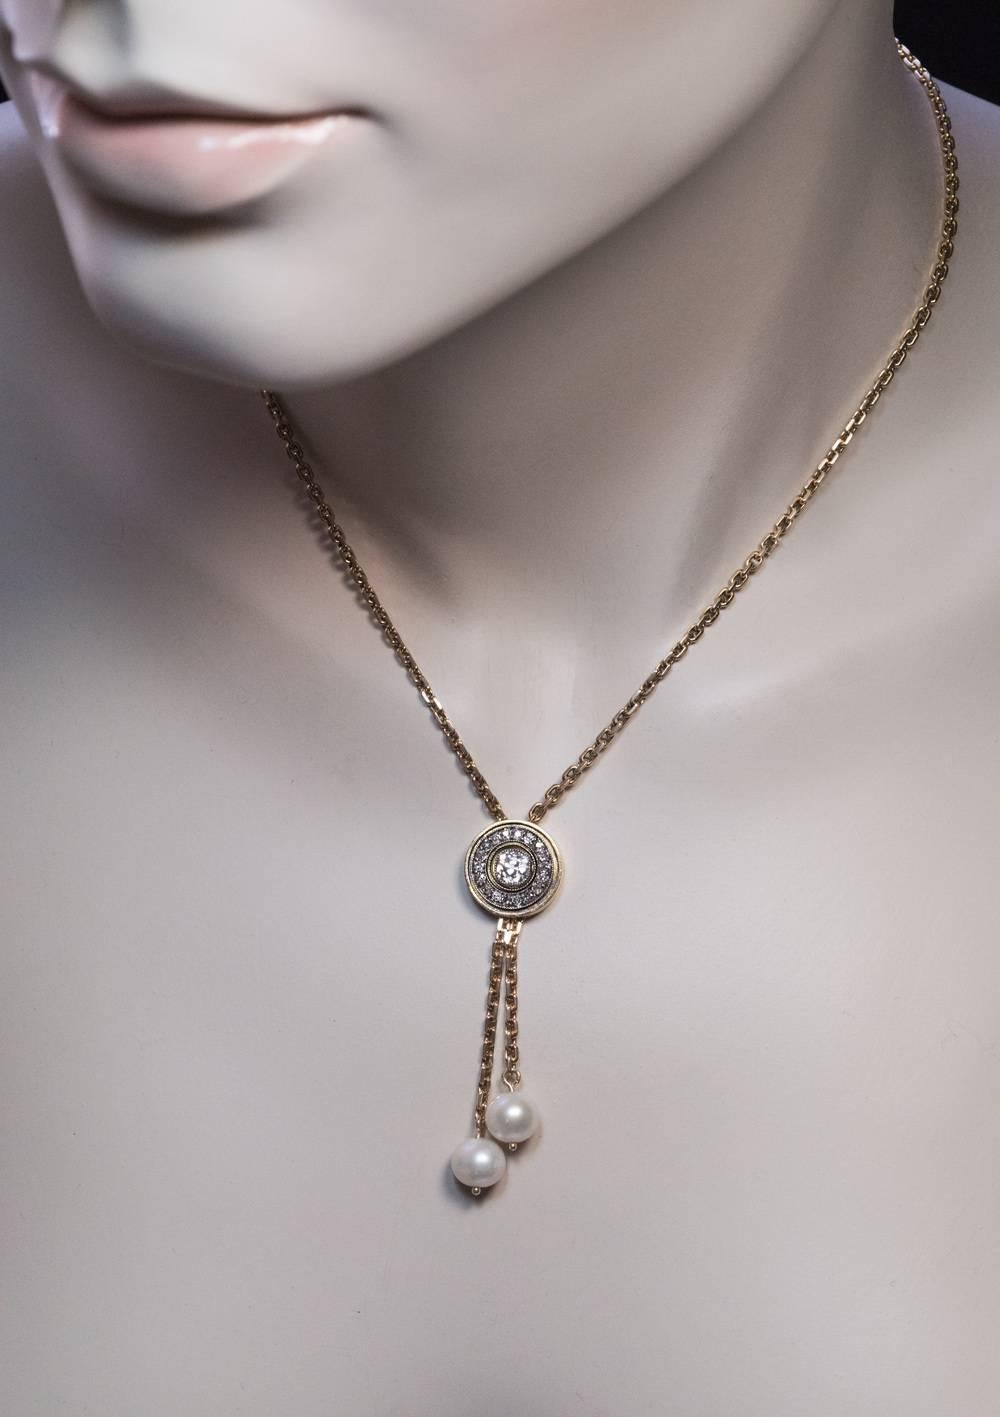 Made in St. Petersburg between 1899 and 1903

A 14K gold chain necklace is centered with a round diamond-set pendant with two dangling pearls.The center stone of the pendant is an antique cushion cut diamond (5.15 x 5.15 x 3.4 mm, approximately